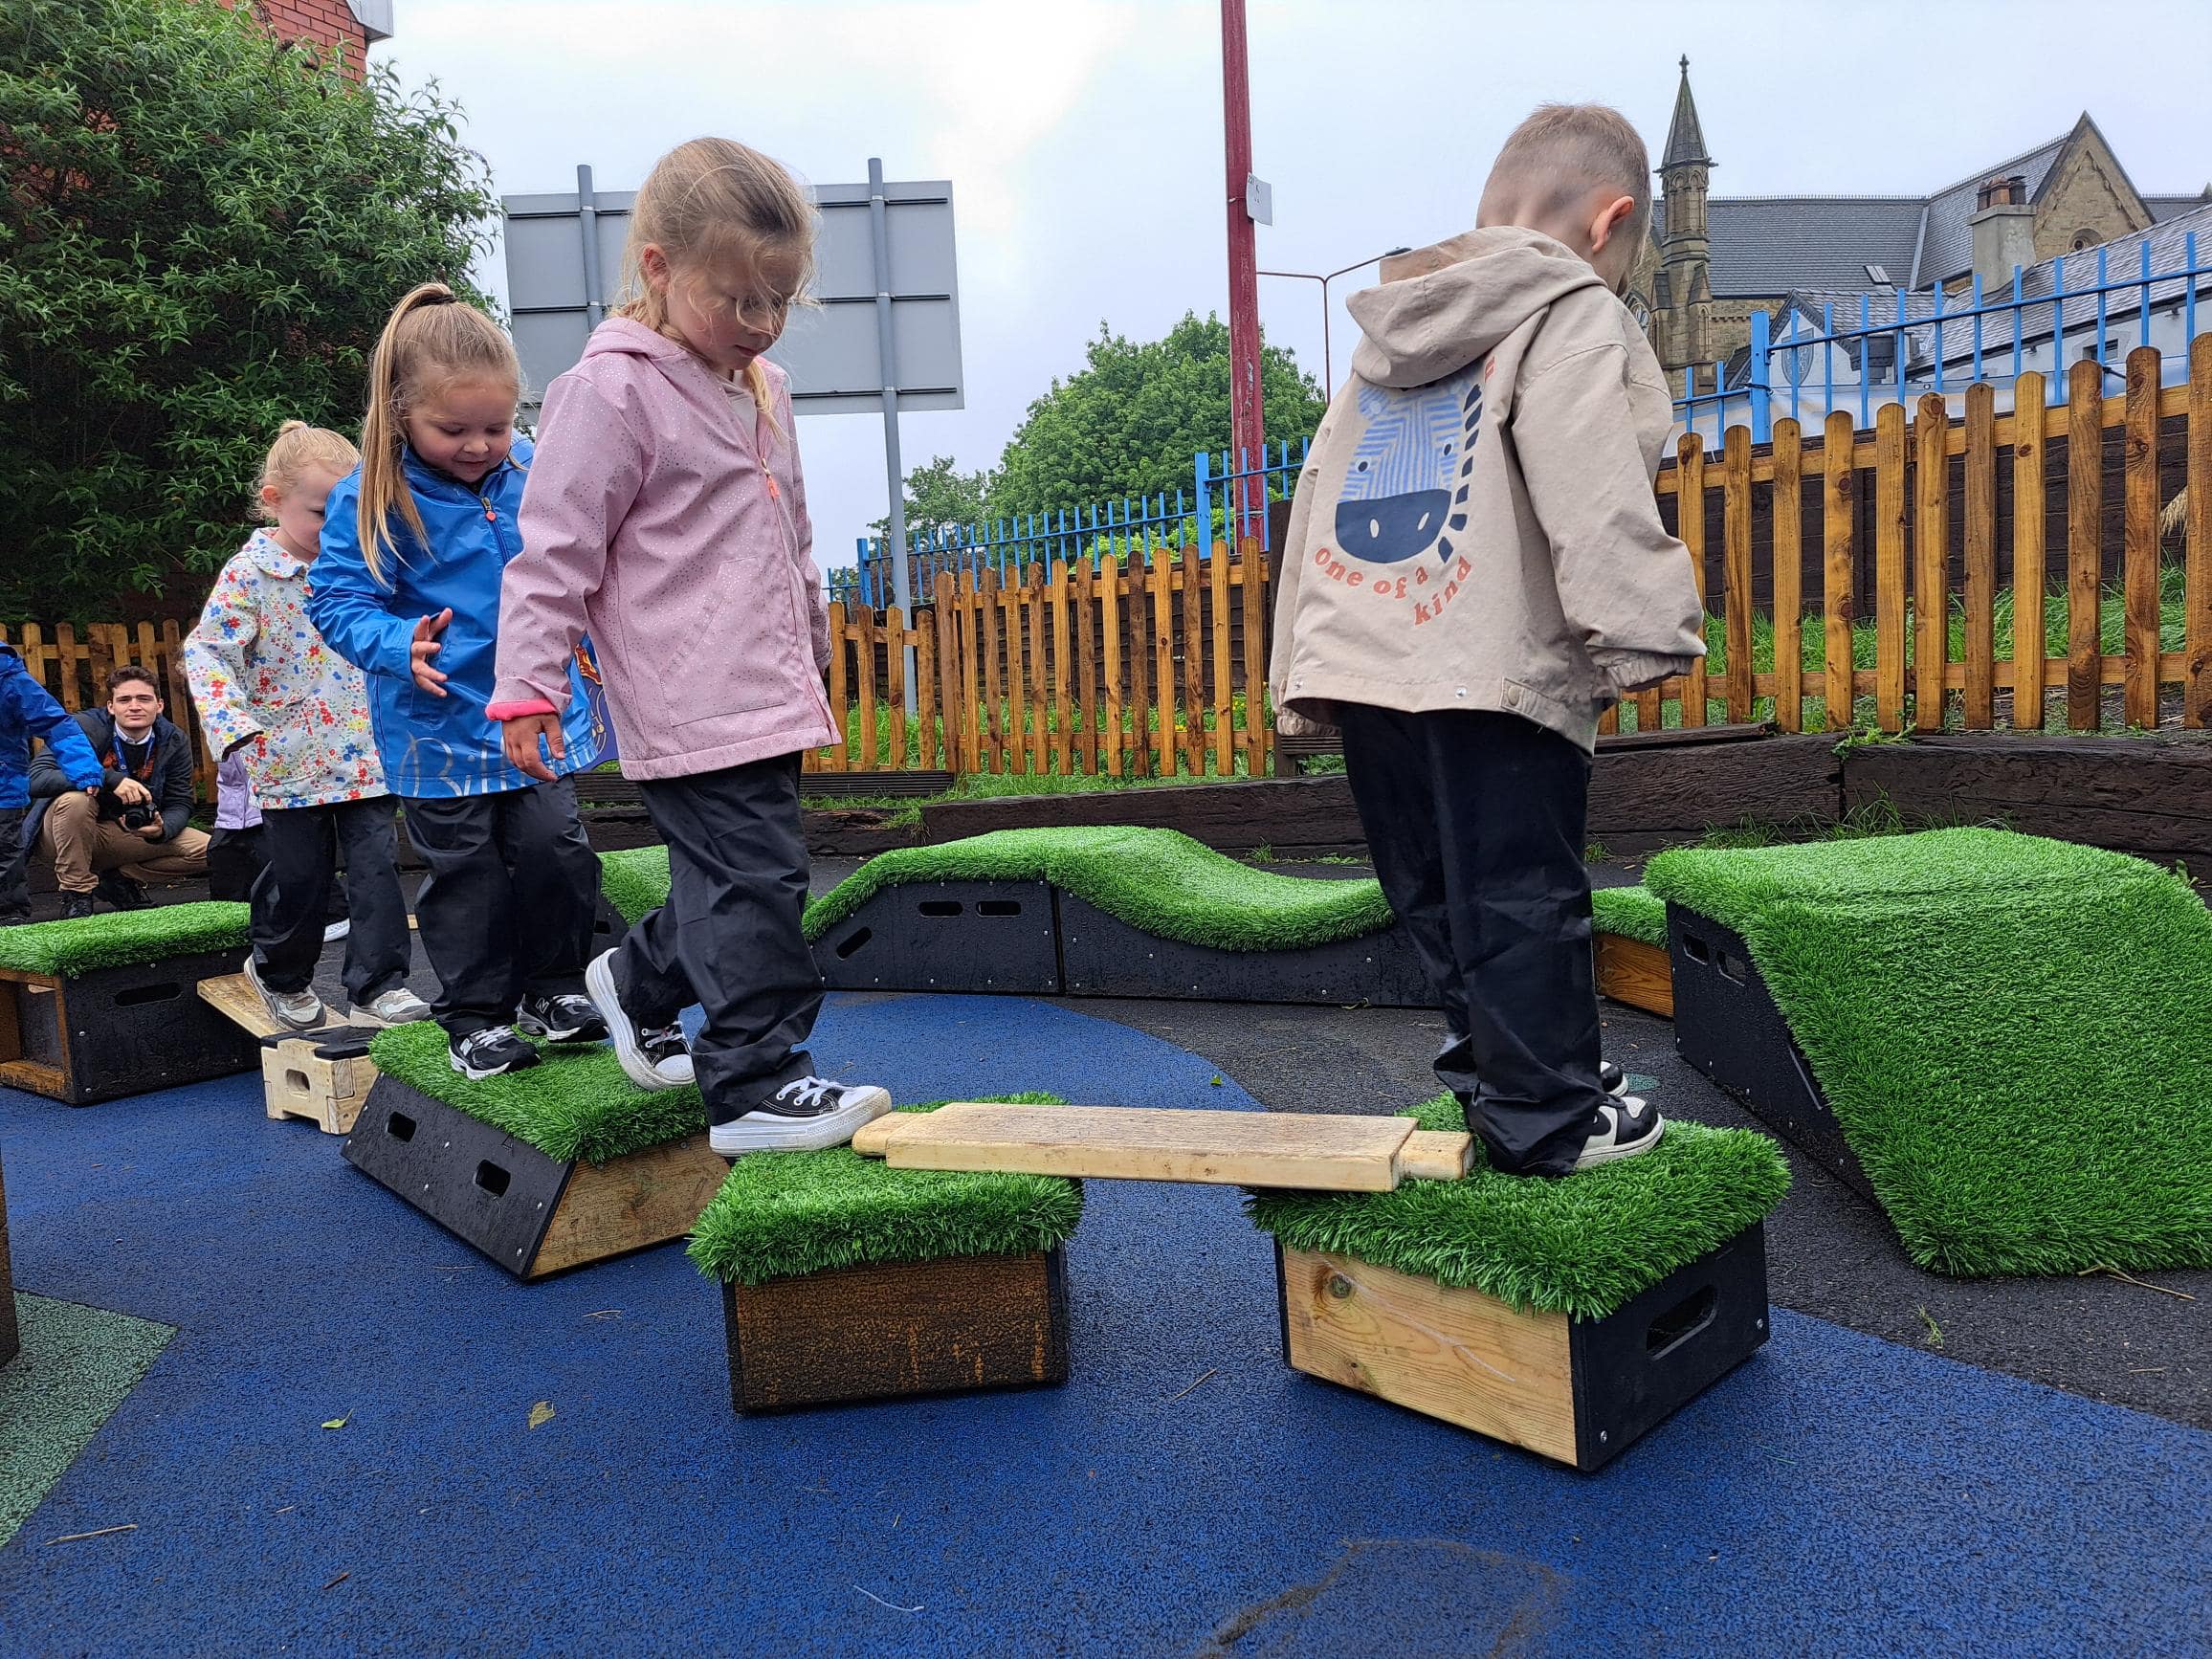 A group of children are completing an obstacle course made from wooden planks and wooden blocks. Some of the wooden blocks are black with artificial grass laid on top of them. The children are in a single file line.